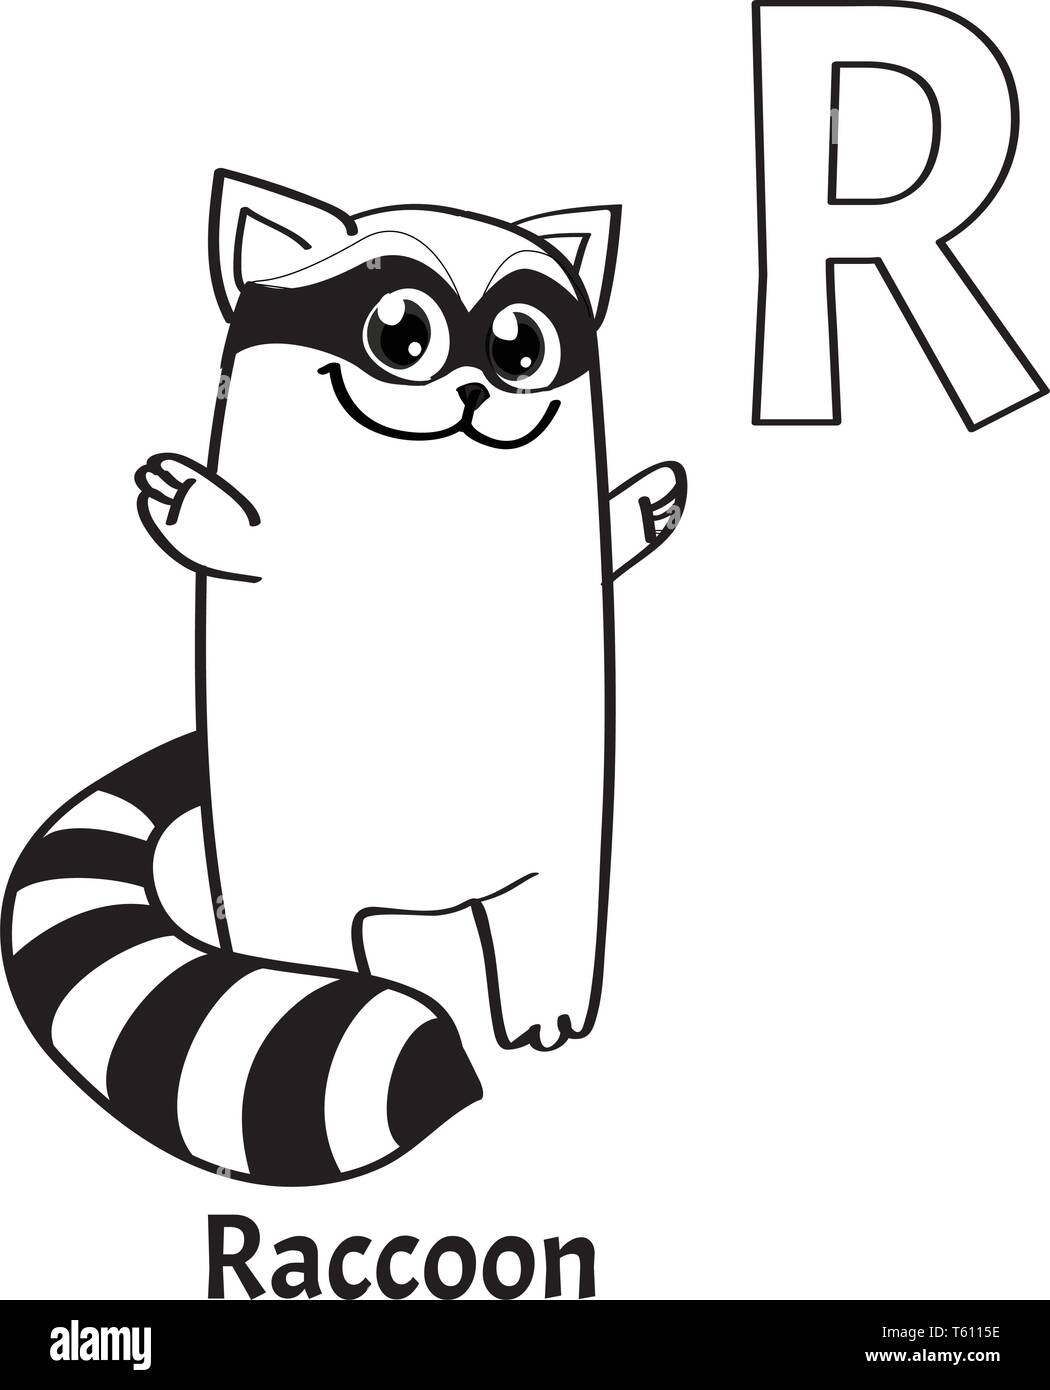 Vector alphabet letter r coloring page raccoon stock vector image art